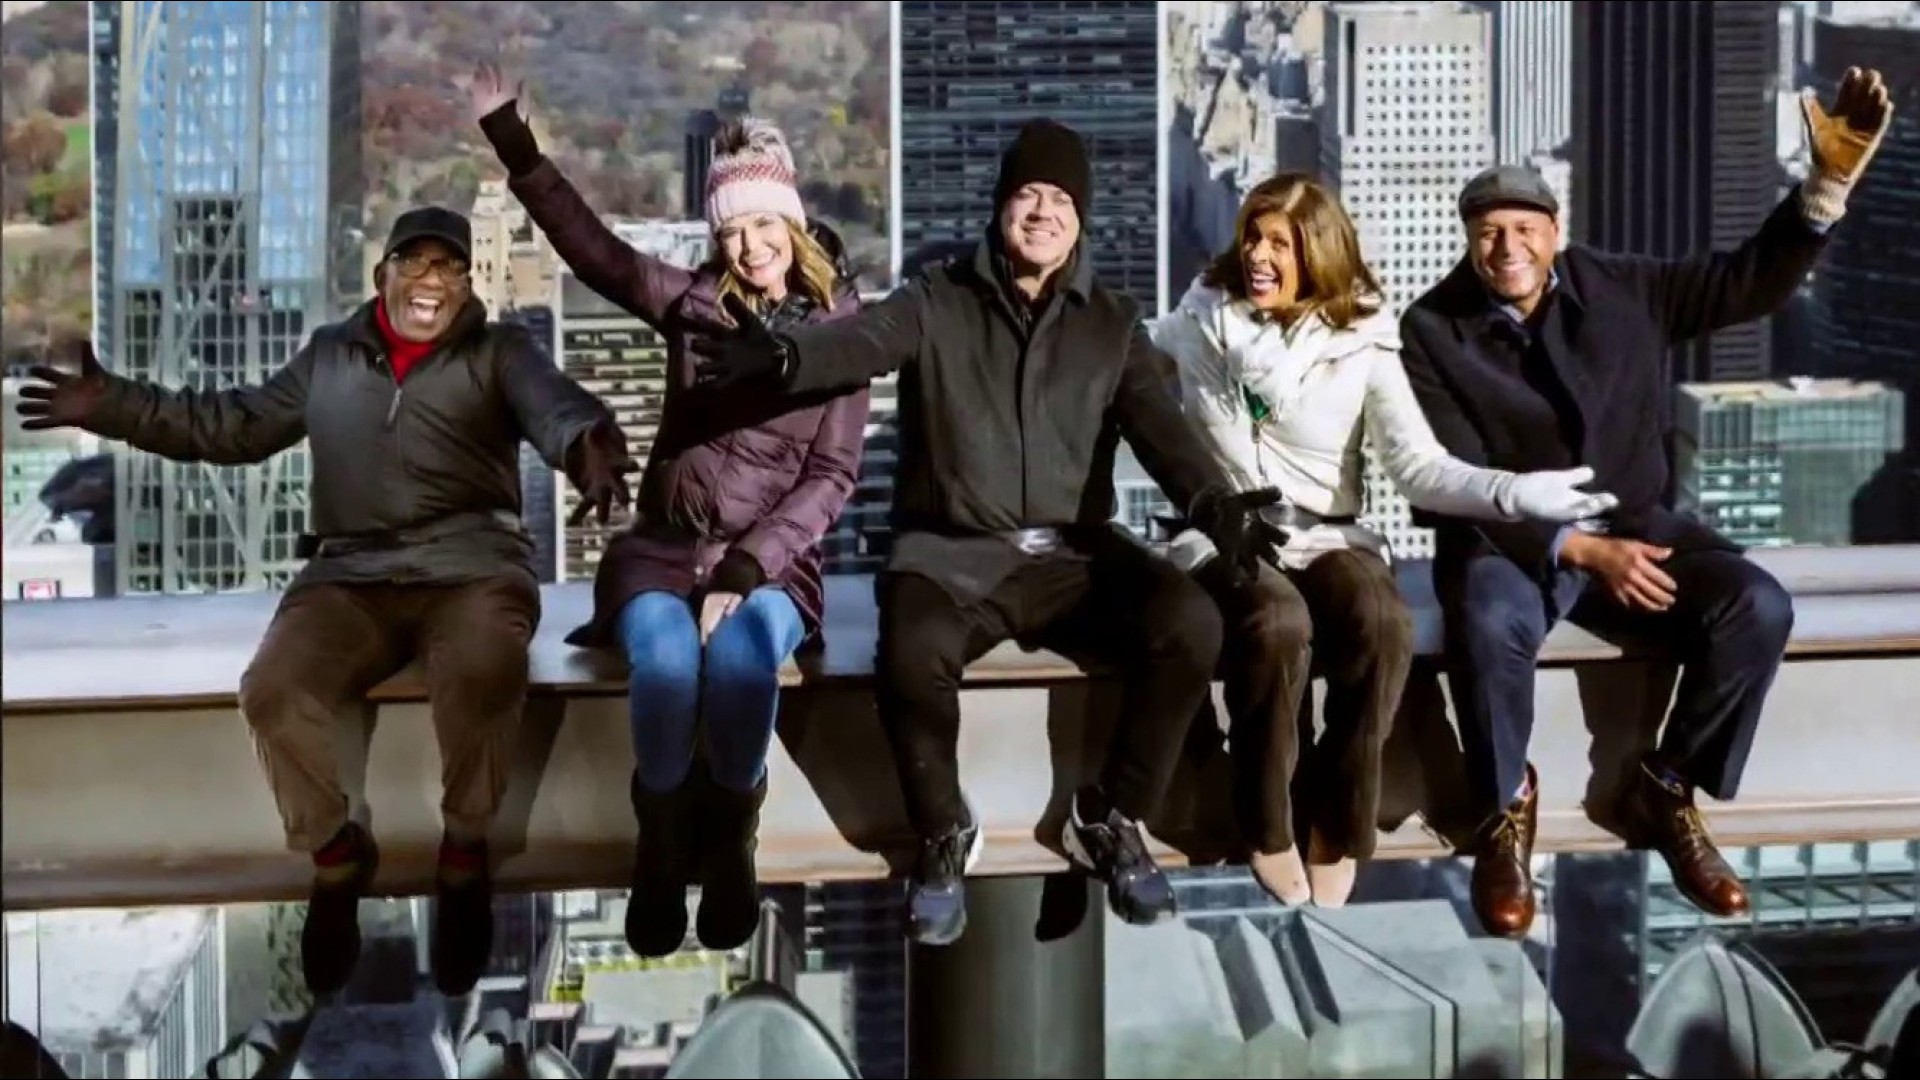 'Beam' them up! TODAY hosts try out new attraction at 30 Rock